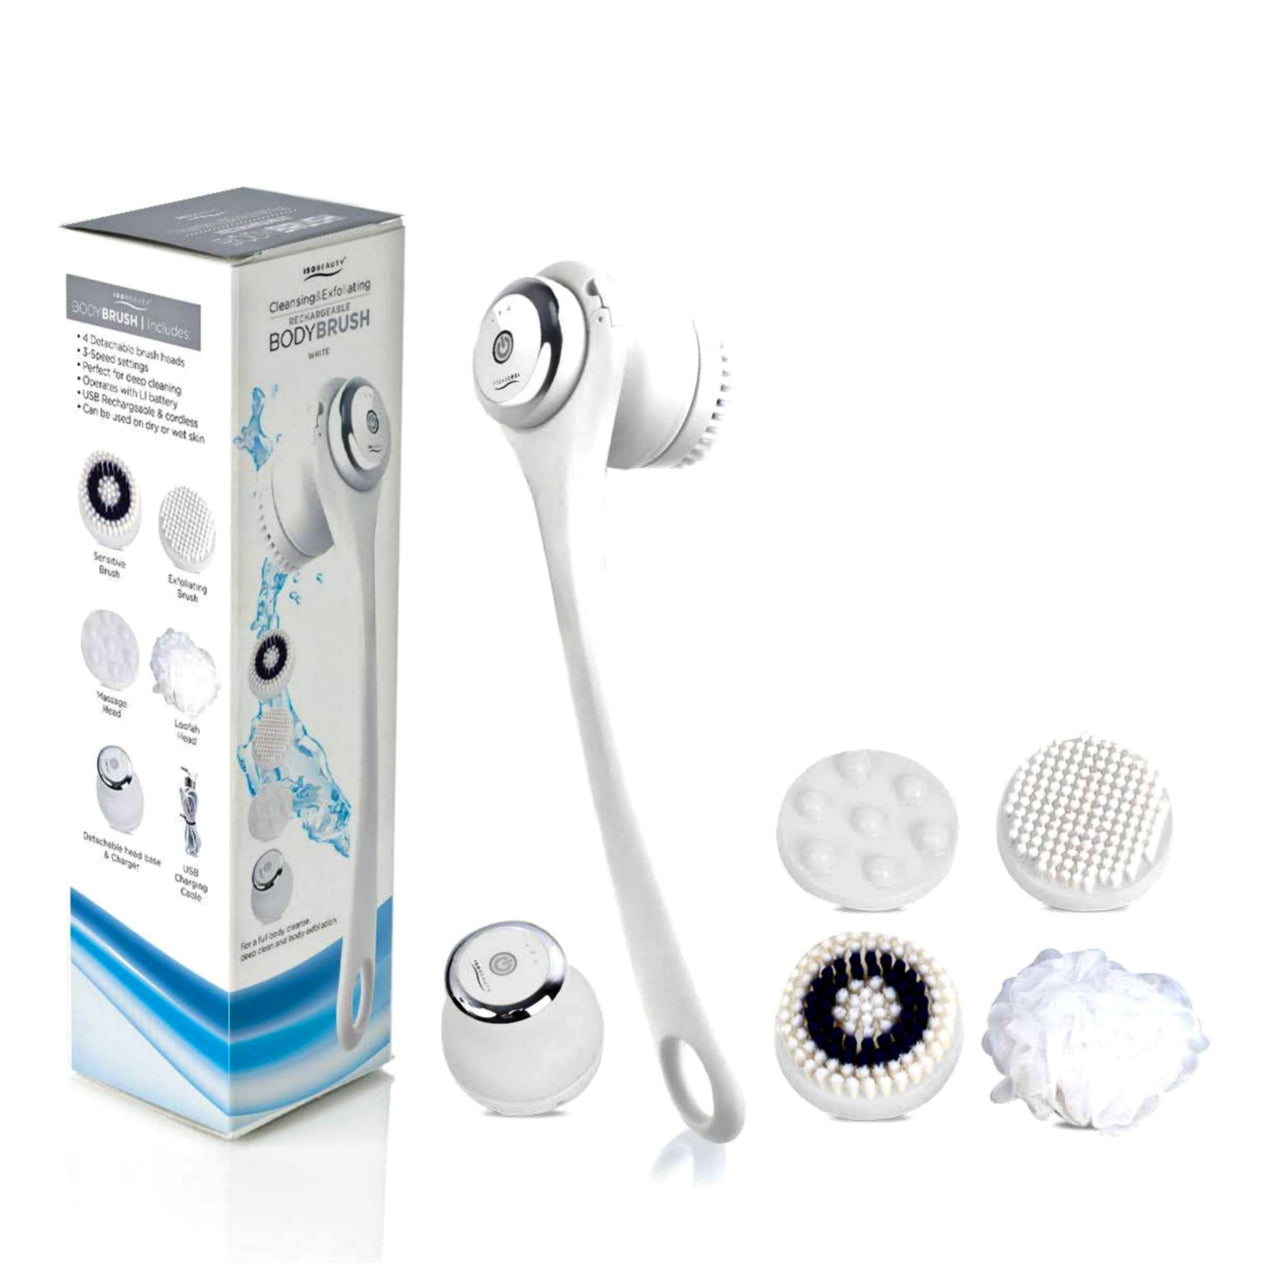 Wireless Waterproof Cleansing and Exfoliating Body Brush Set with 3 Speed 4 Brush Heads Bright White